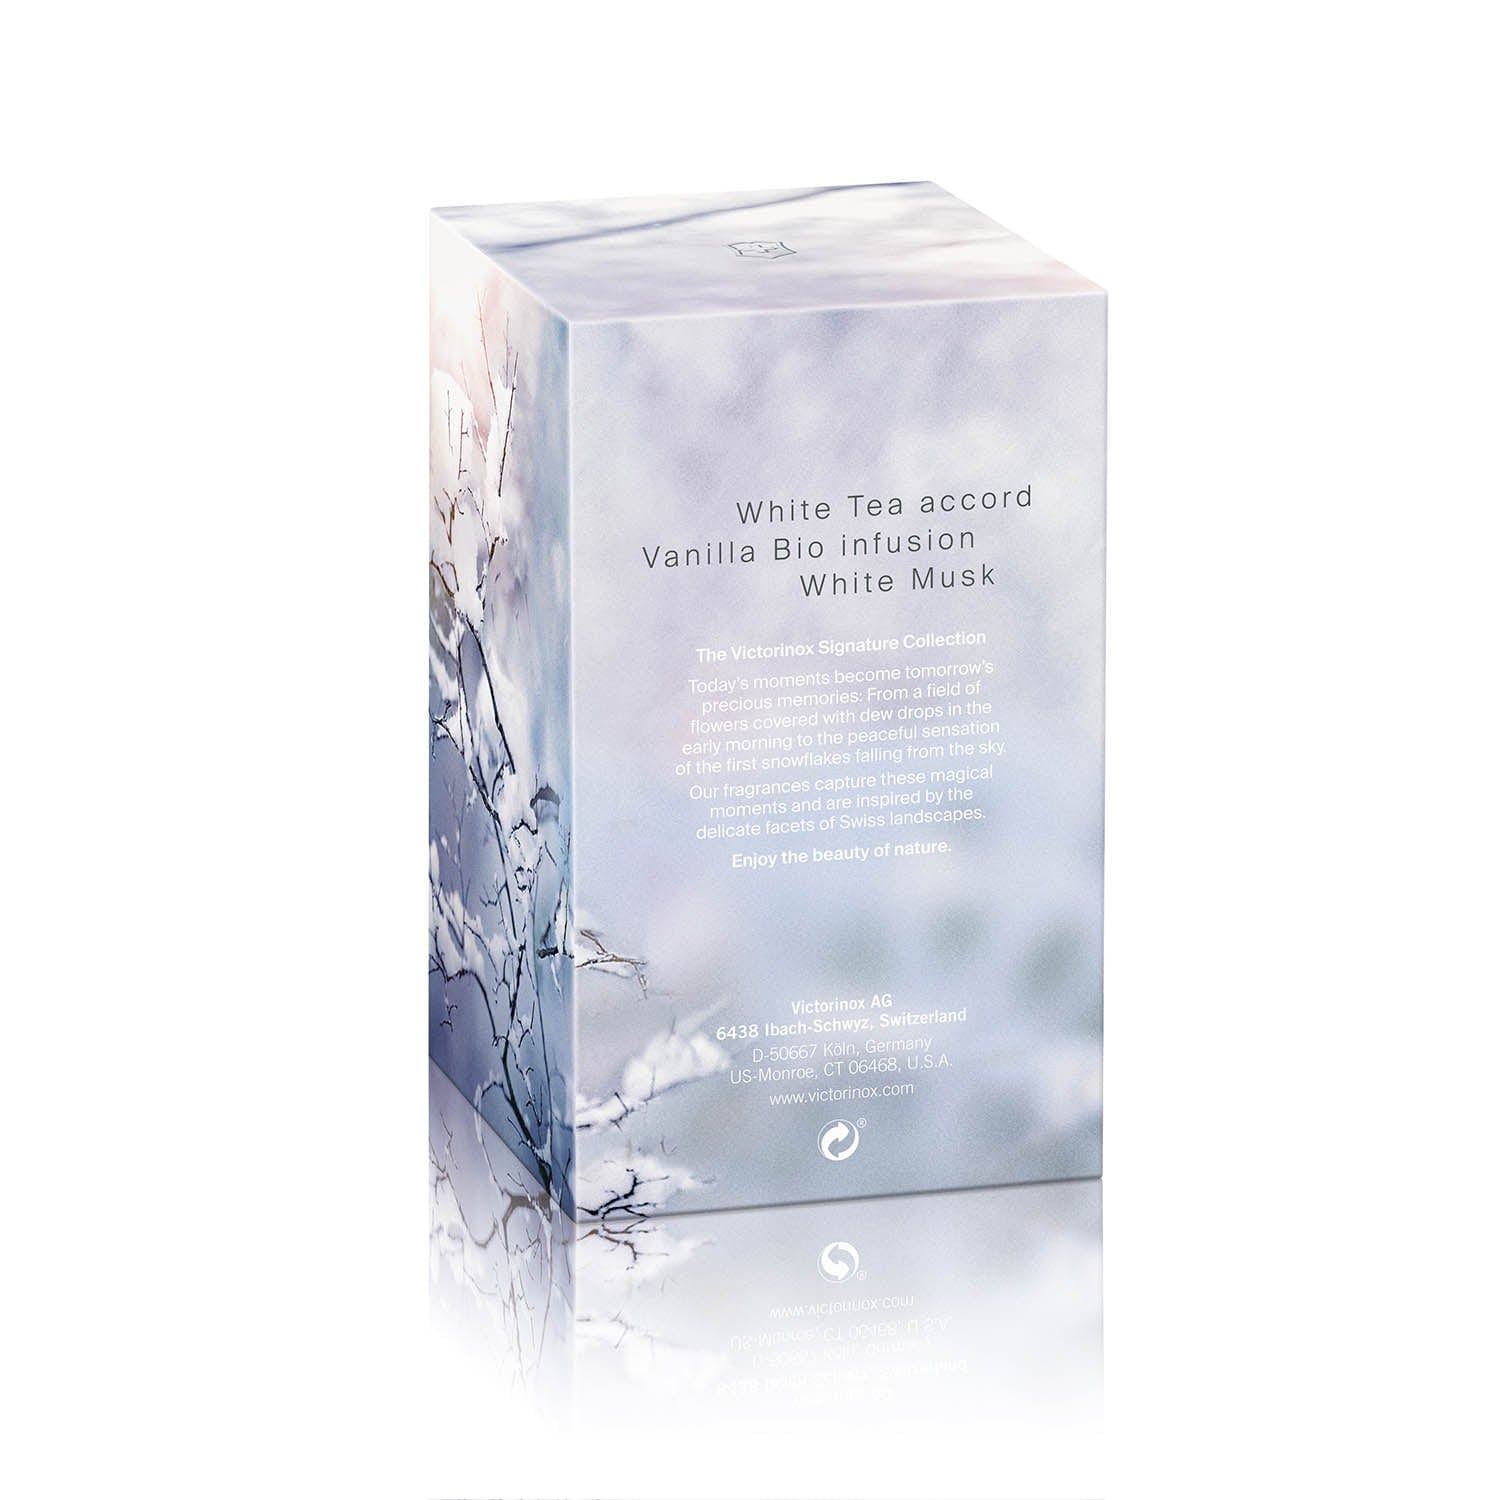 Victorinox First Snow for Her EDT 100ml